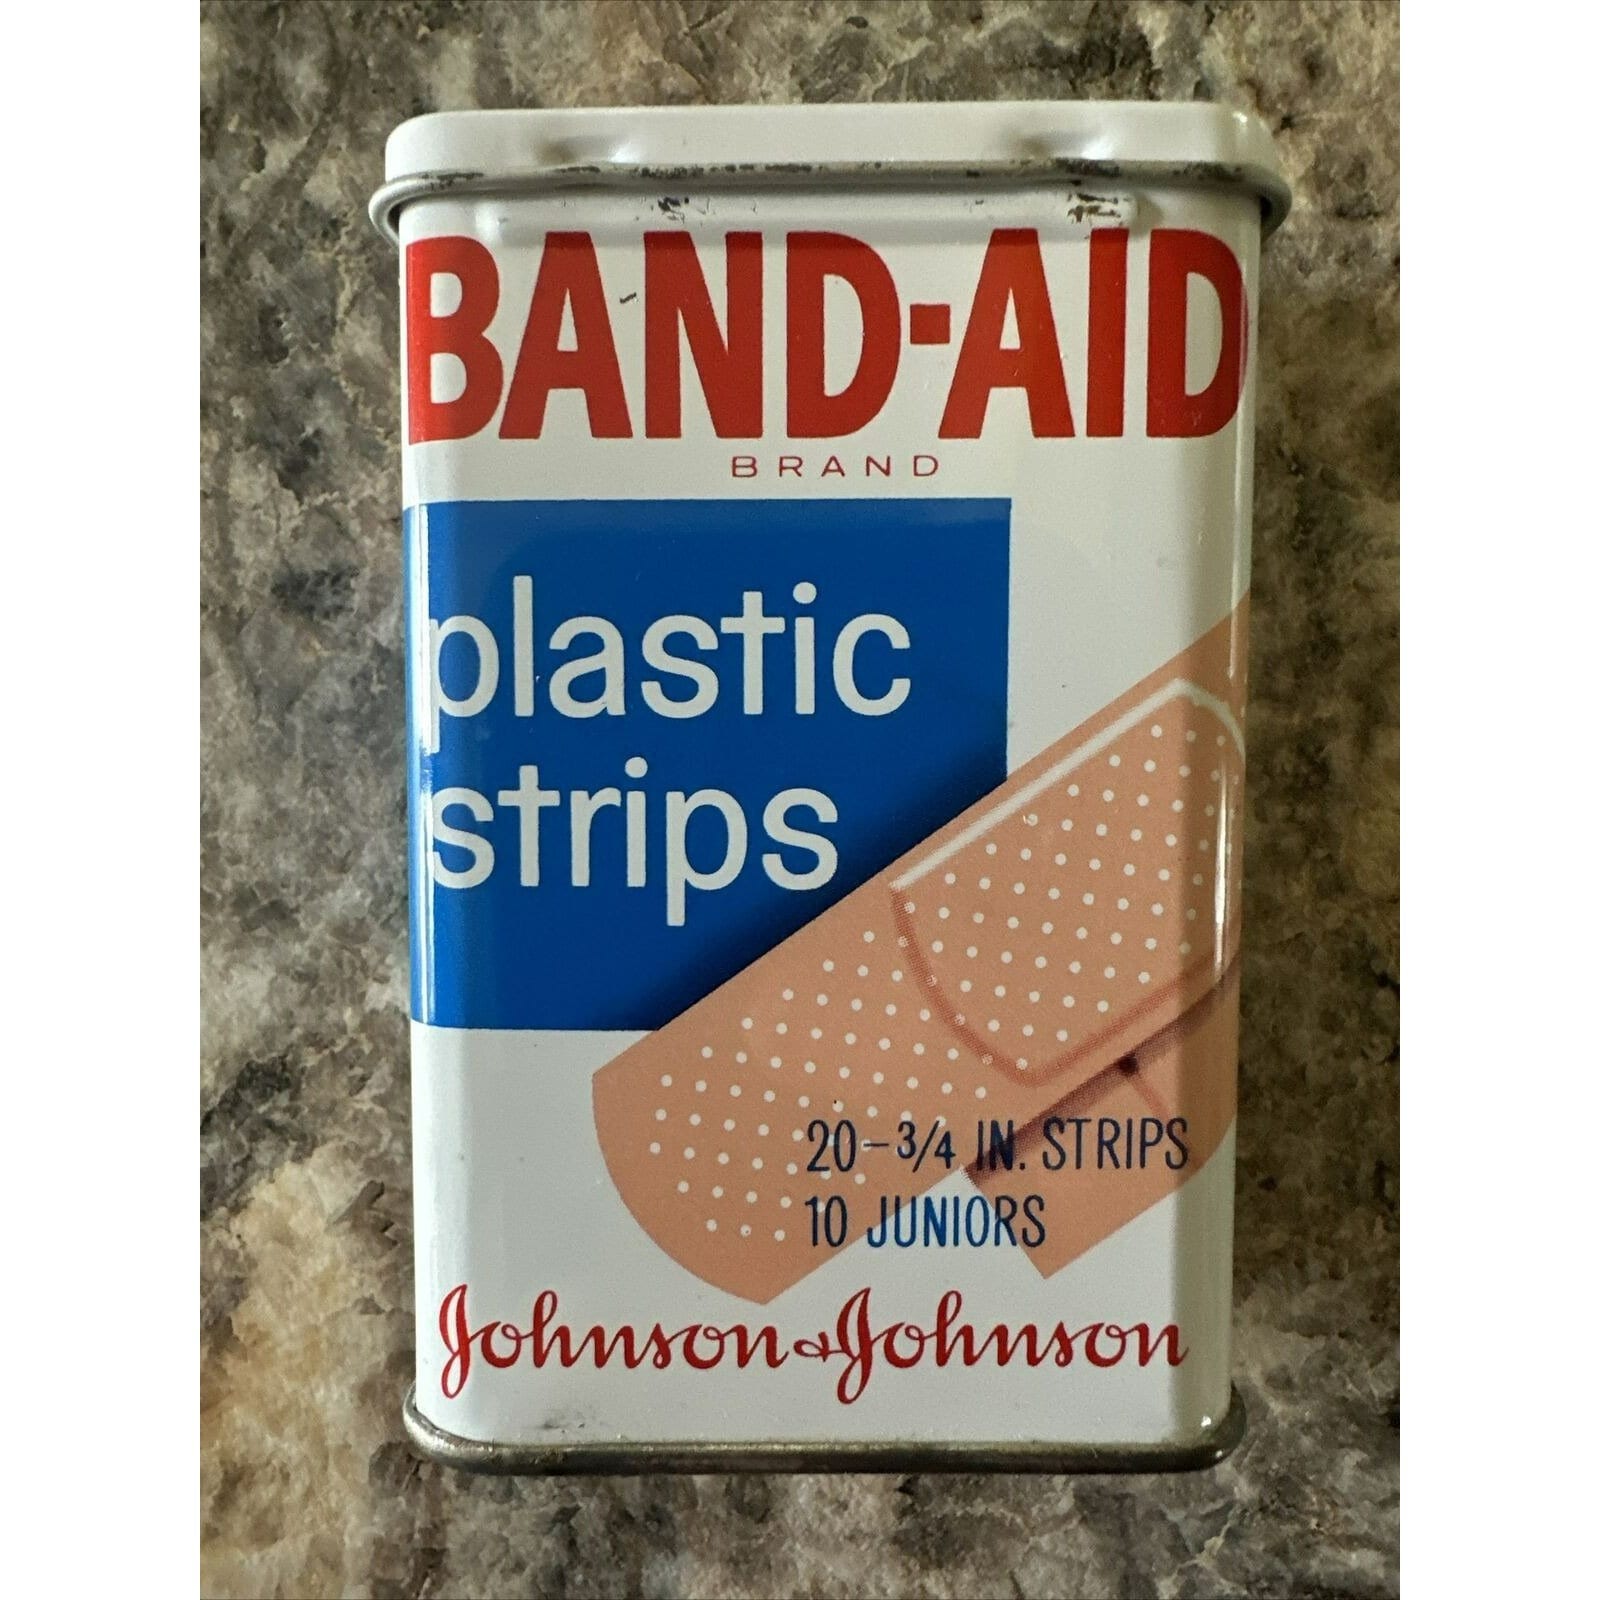  Bandaid Container